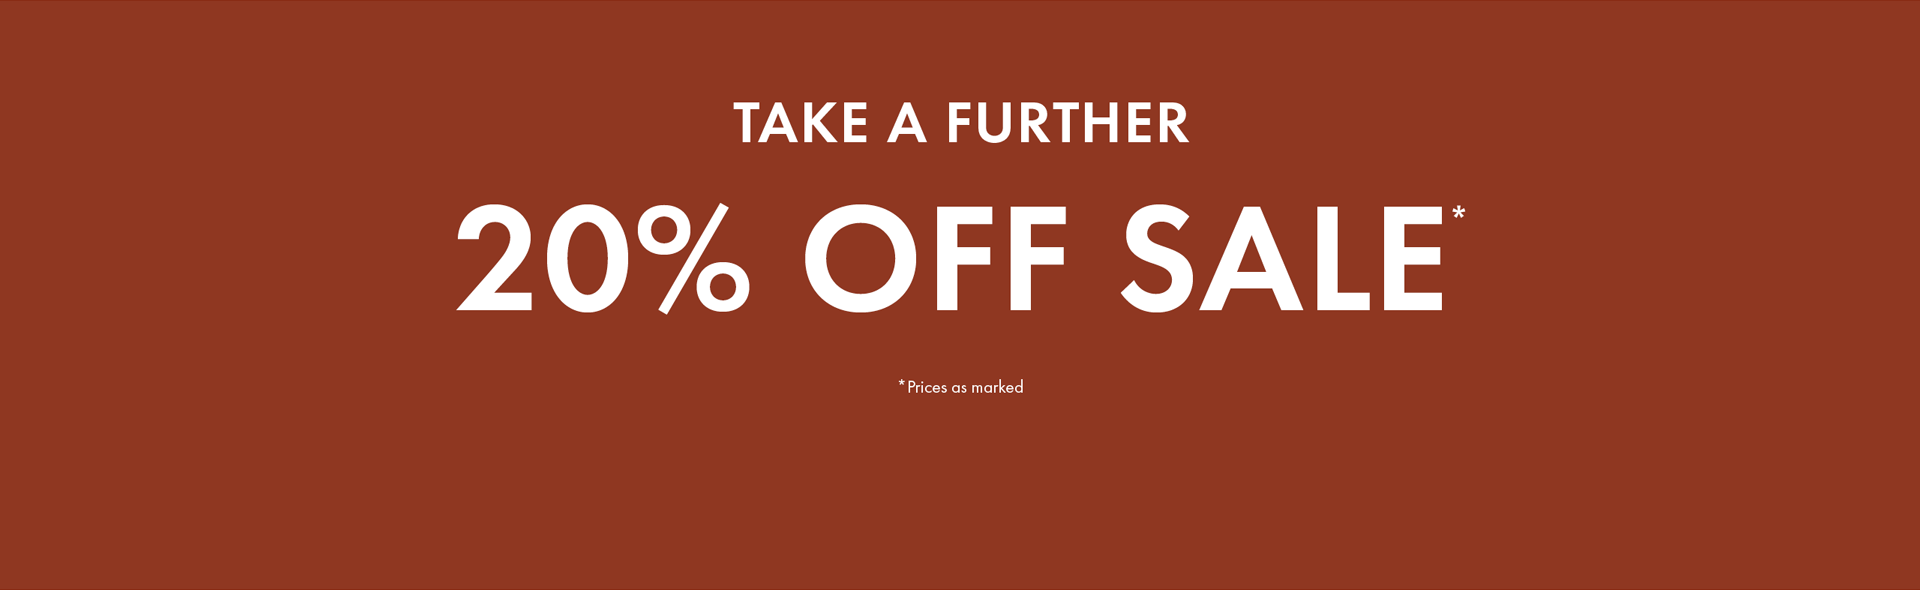 Autumn Fashion Event - Take a Further 20% off Sale Items*